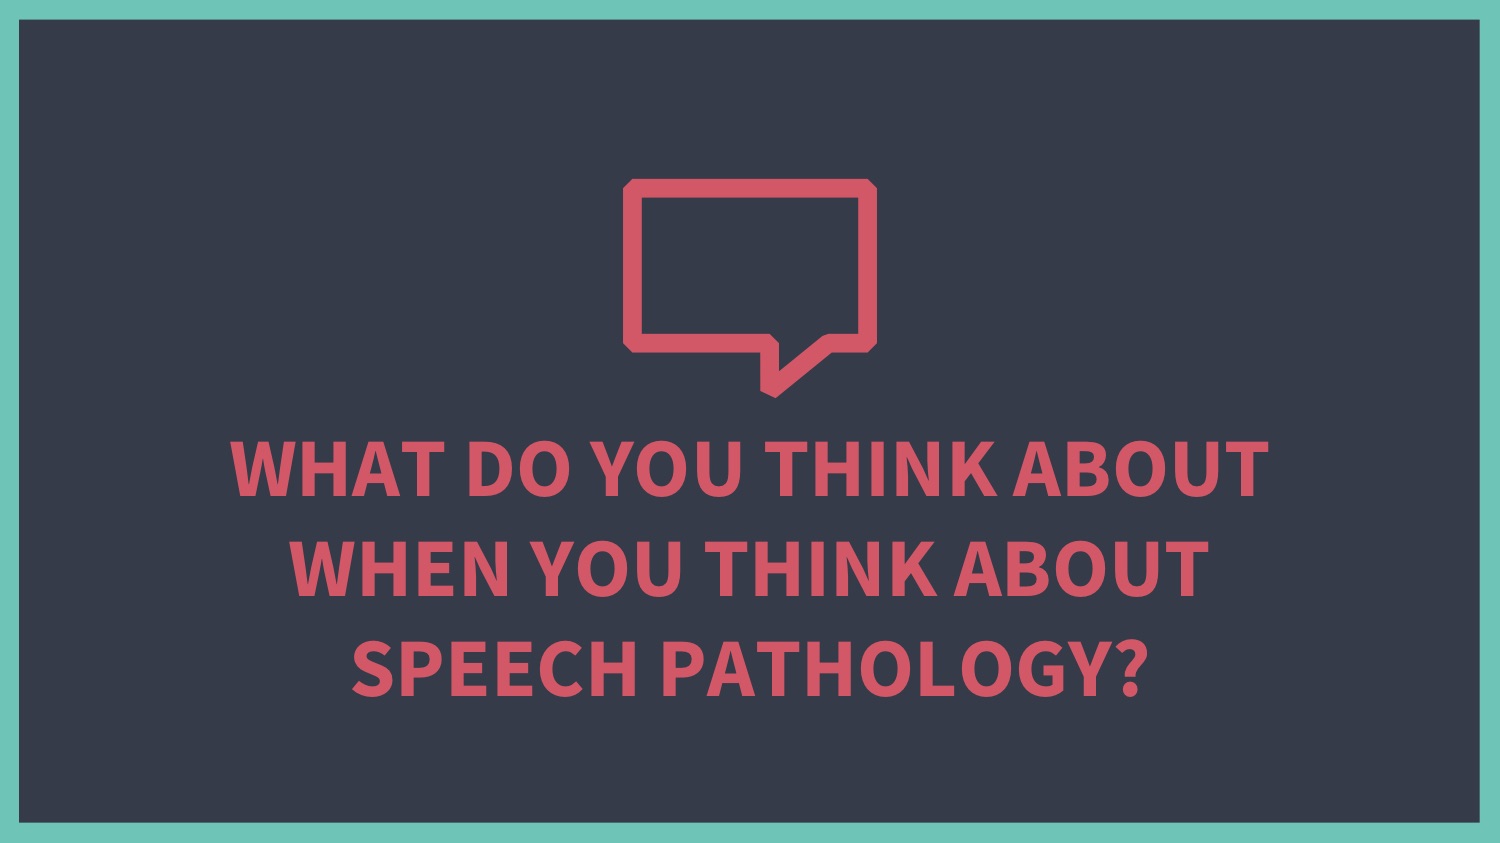 What do you think about when you think about speech pathology?